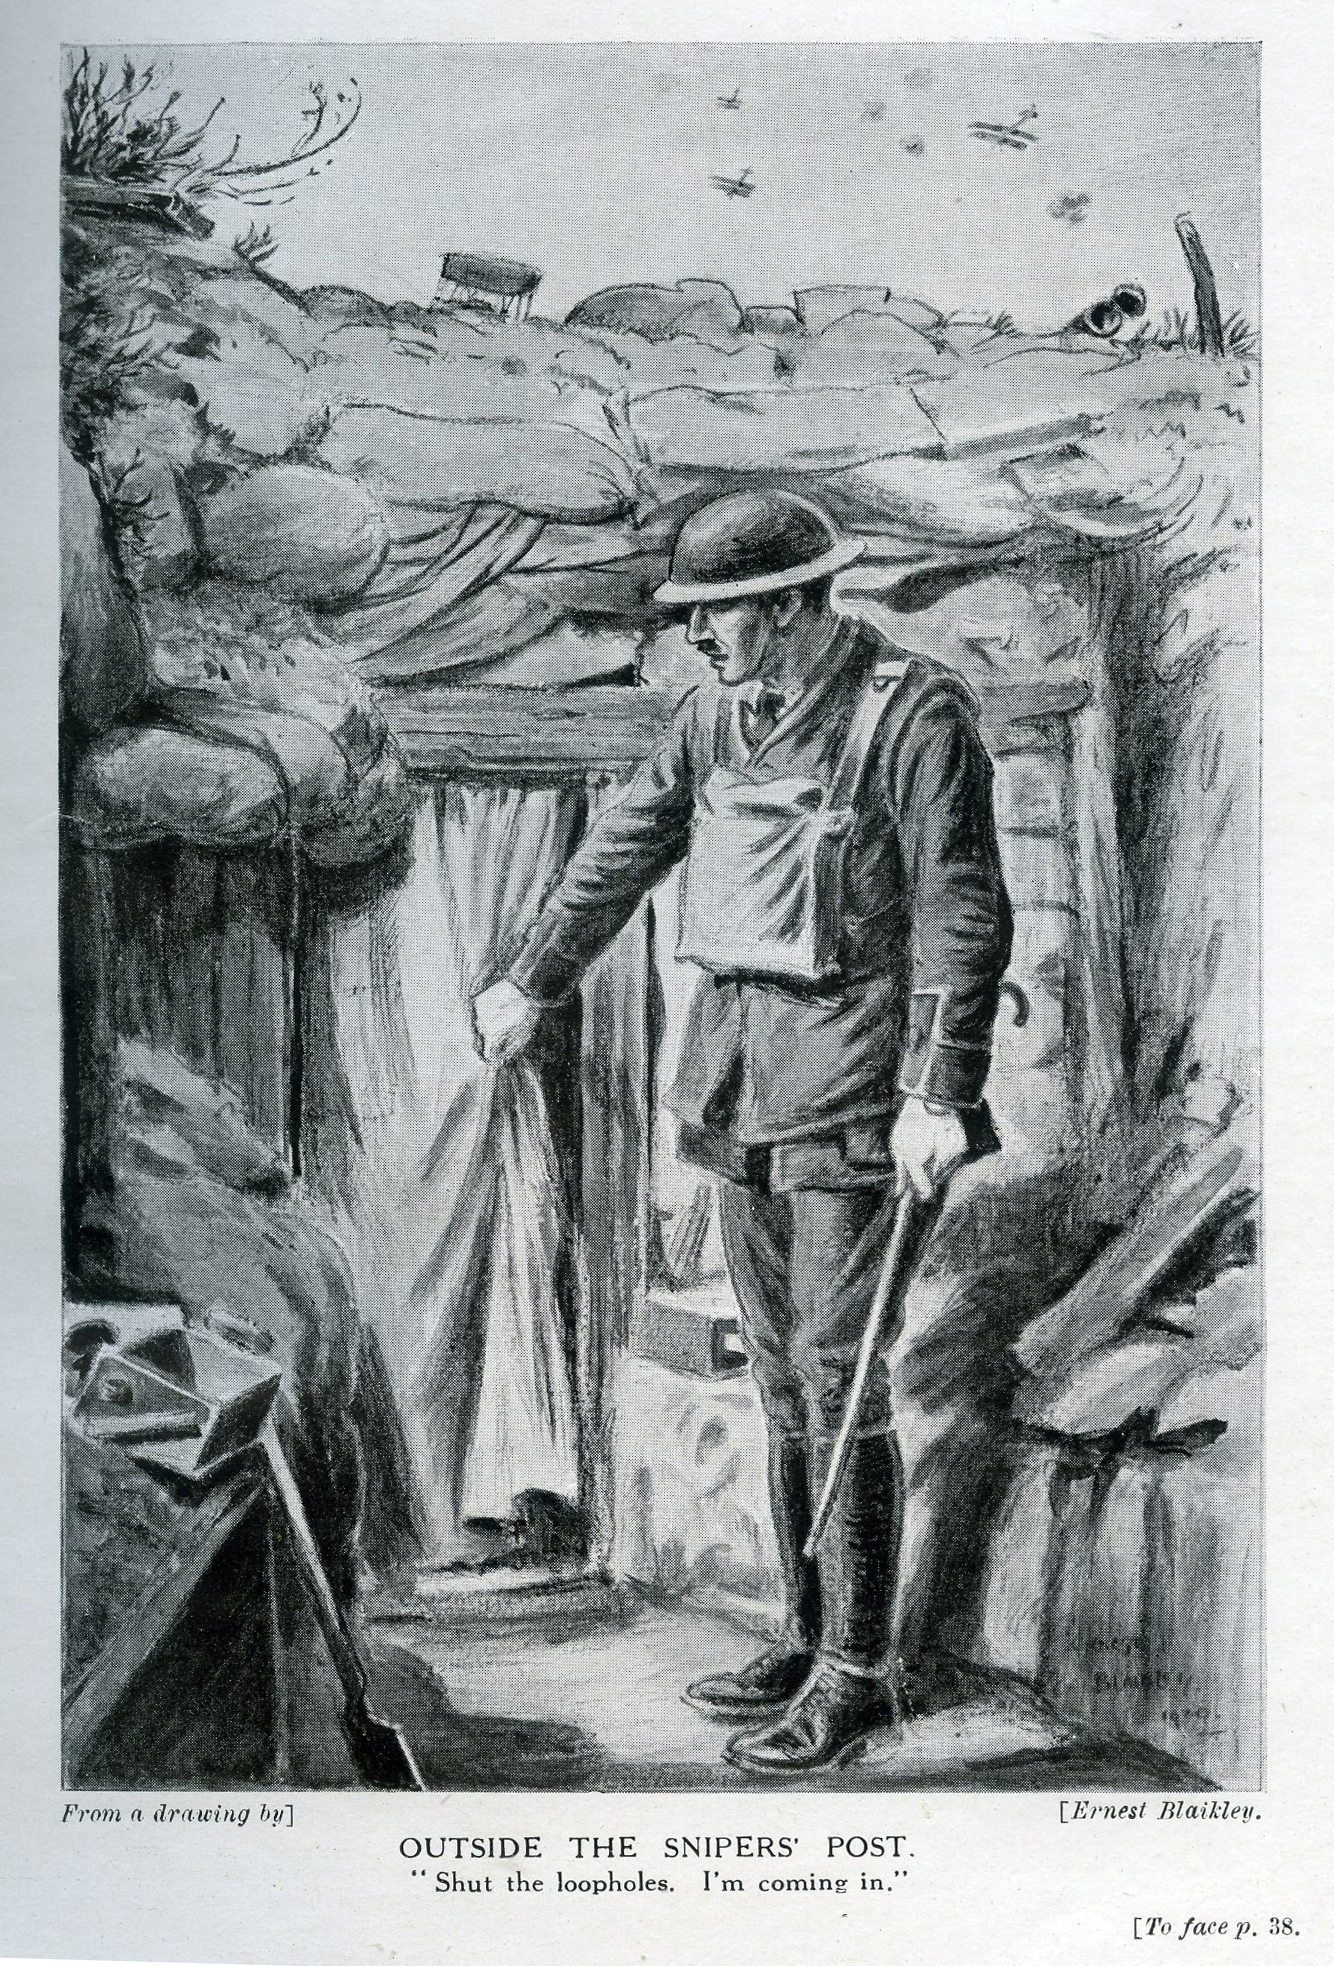 this is an illustration from a magazine with a man and woman standing outside